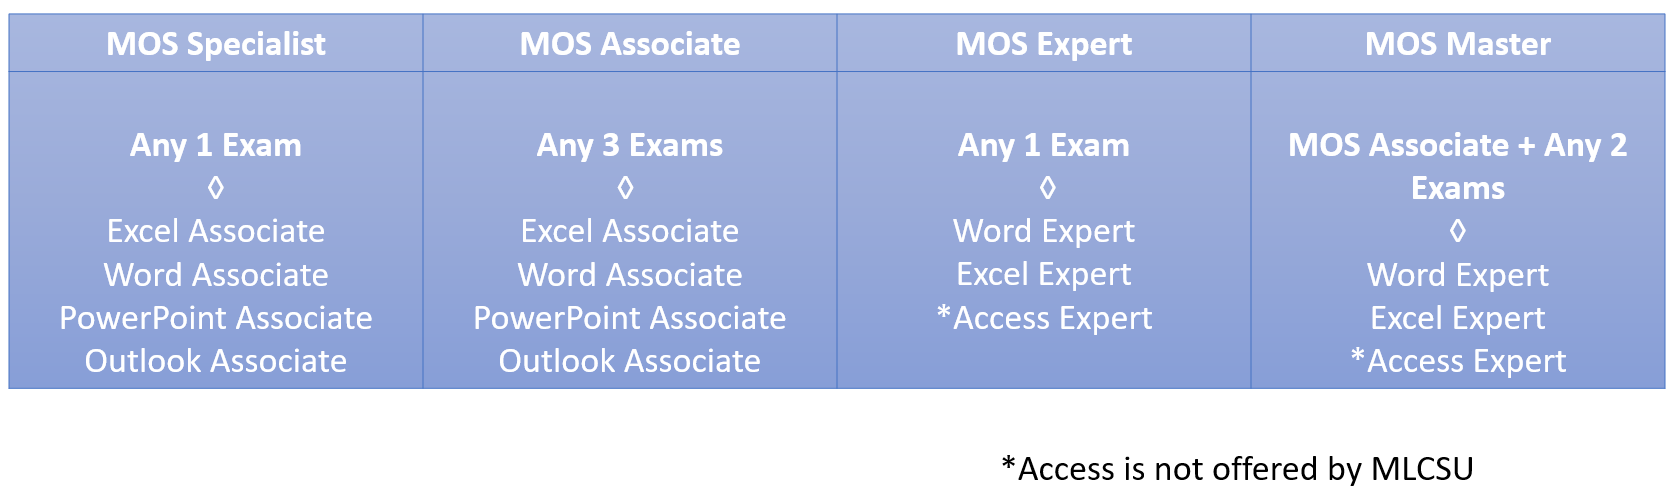 MOS Qualifications Table